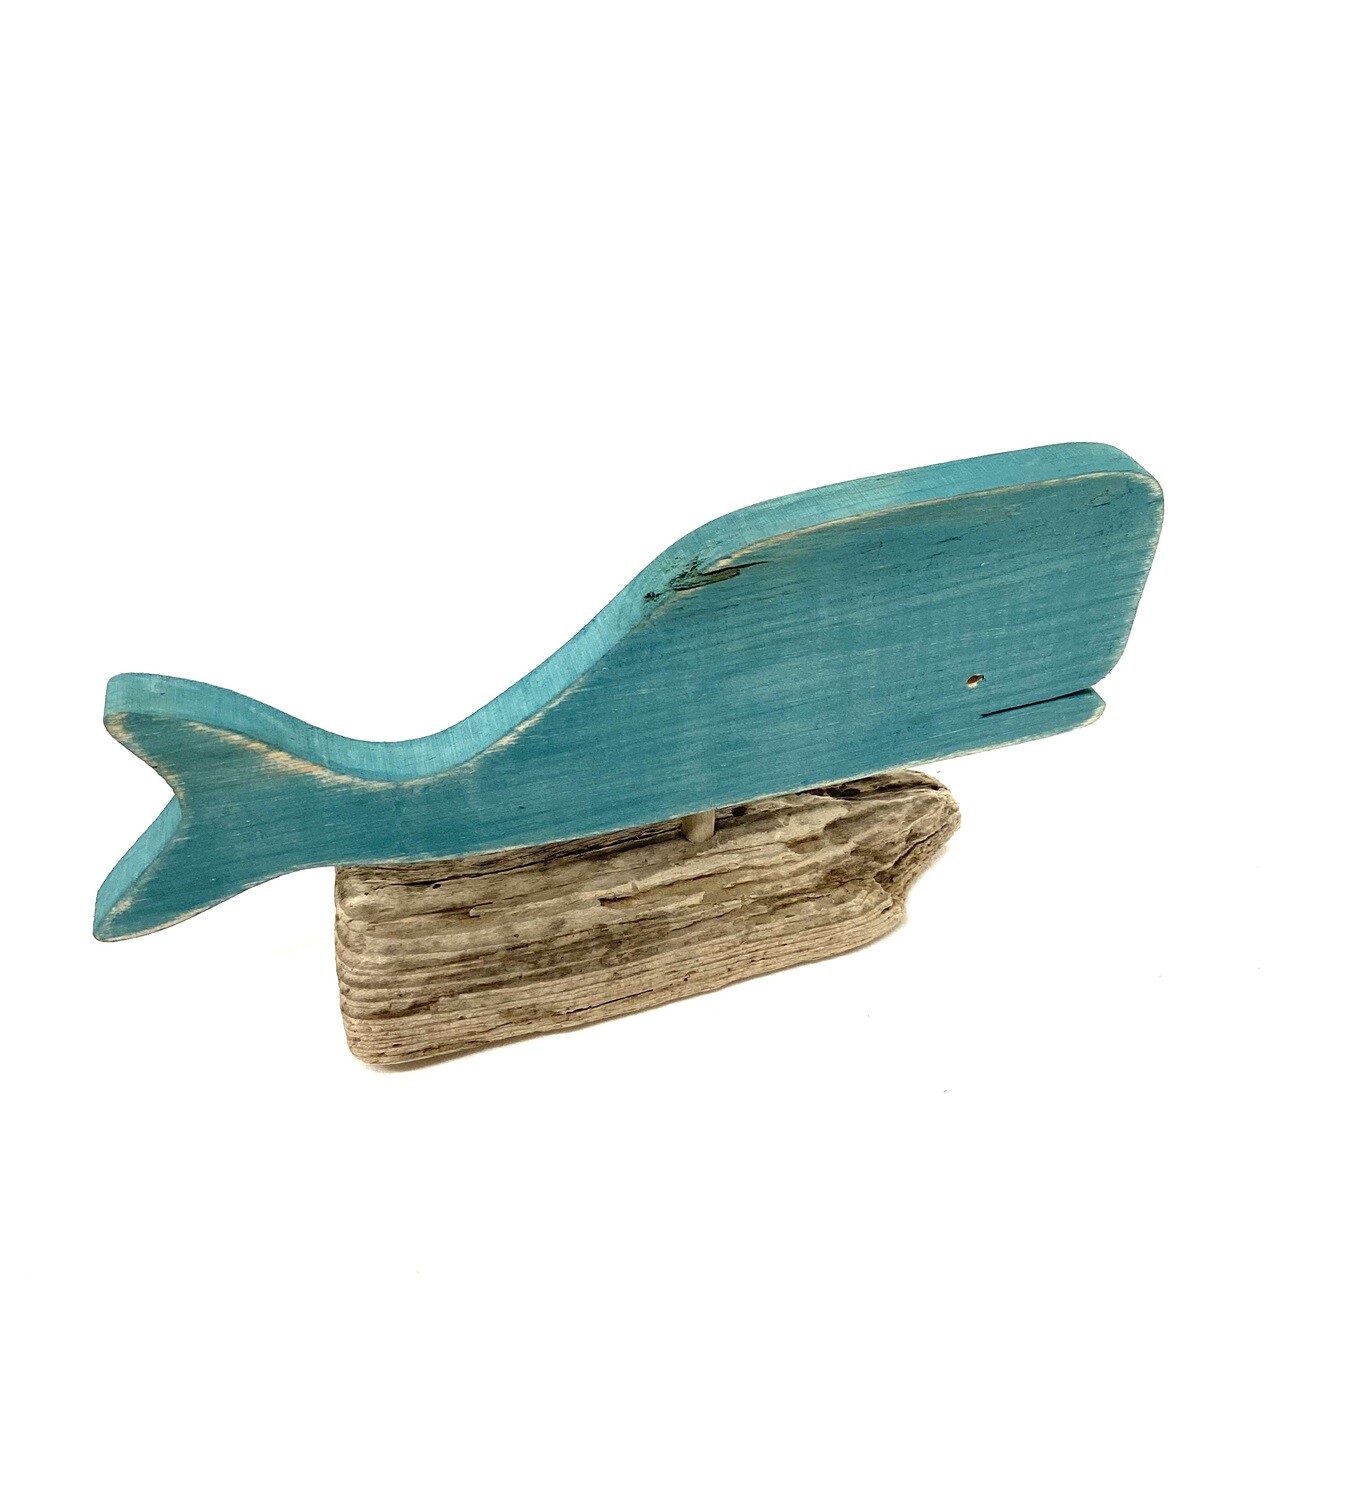 Teal Whale on Driftwood- Jerry Walsh